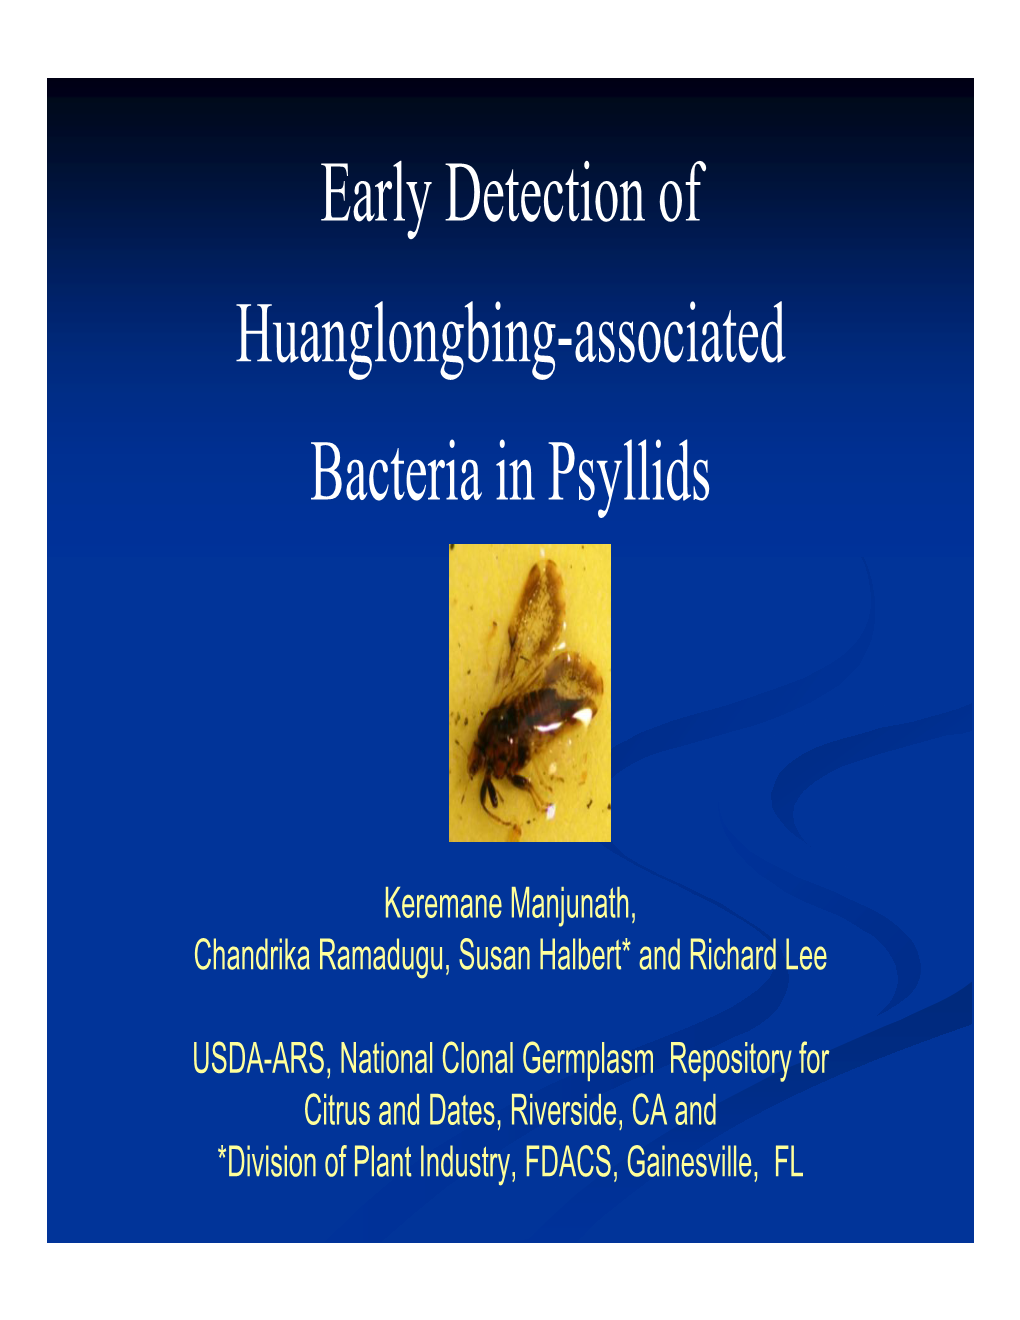 Early Detection of Huanglongbing-Associated Bacteria in Psyllids